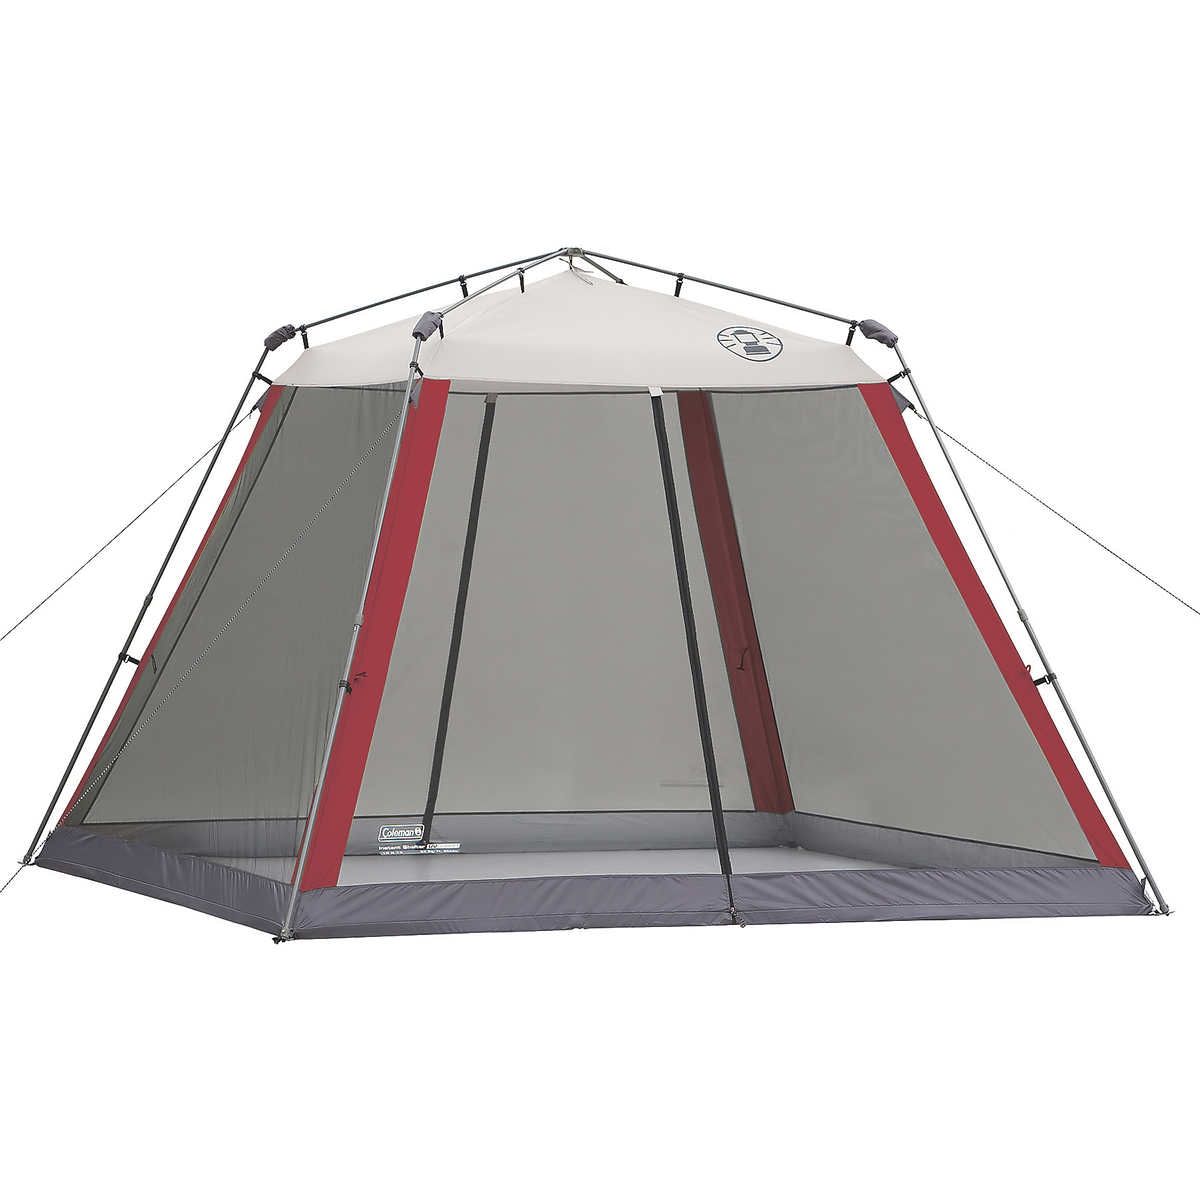 Skylodge 10' x 10' Instant Screen Canopy Tent